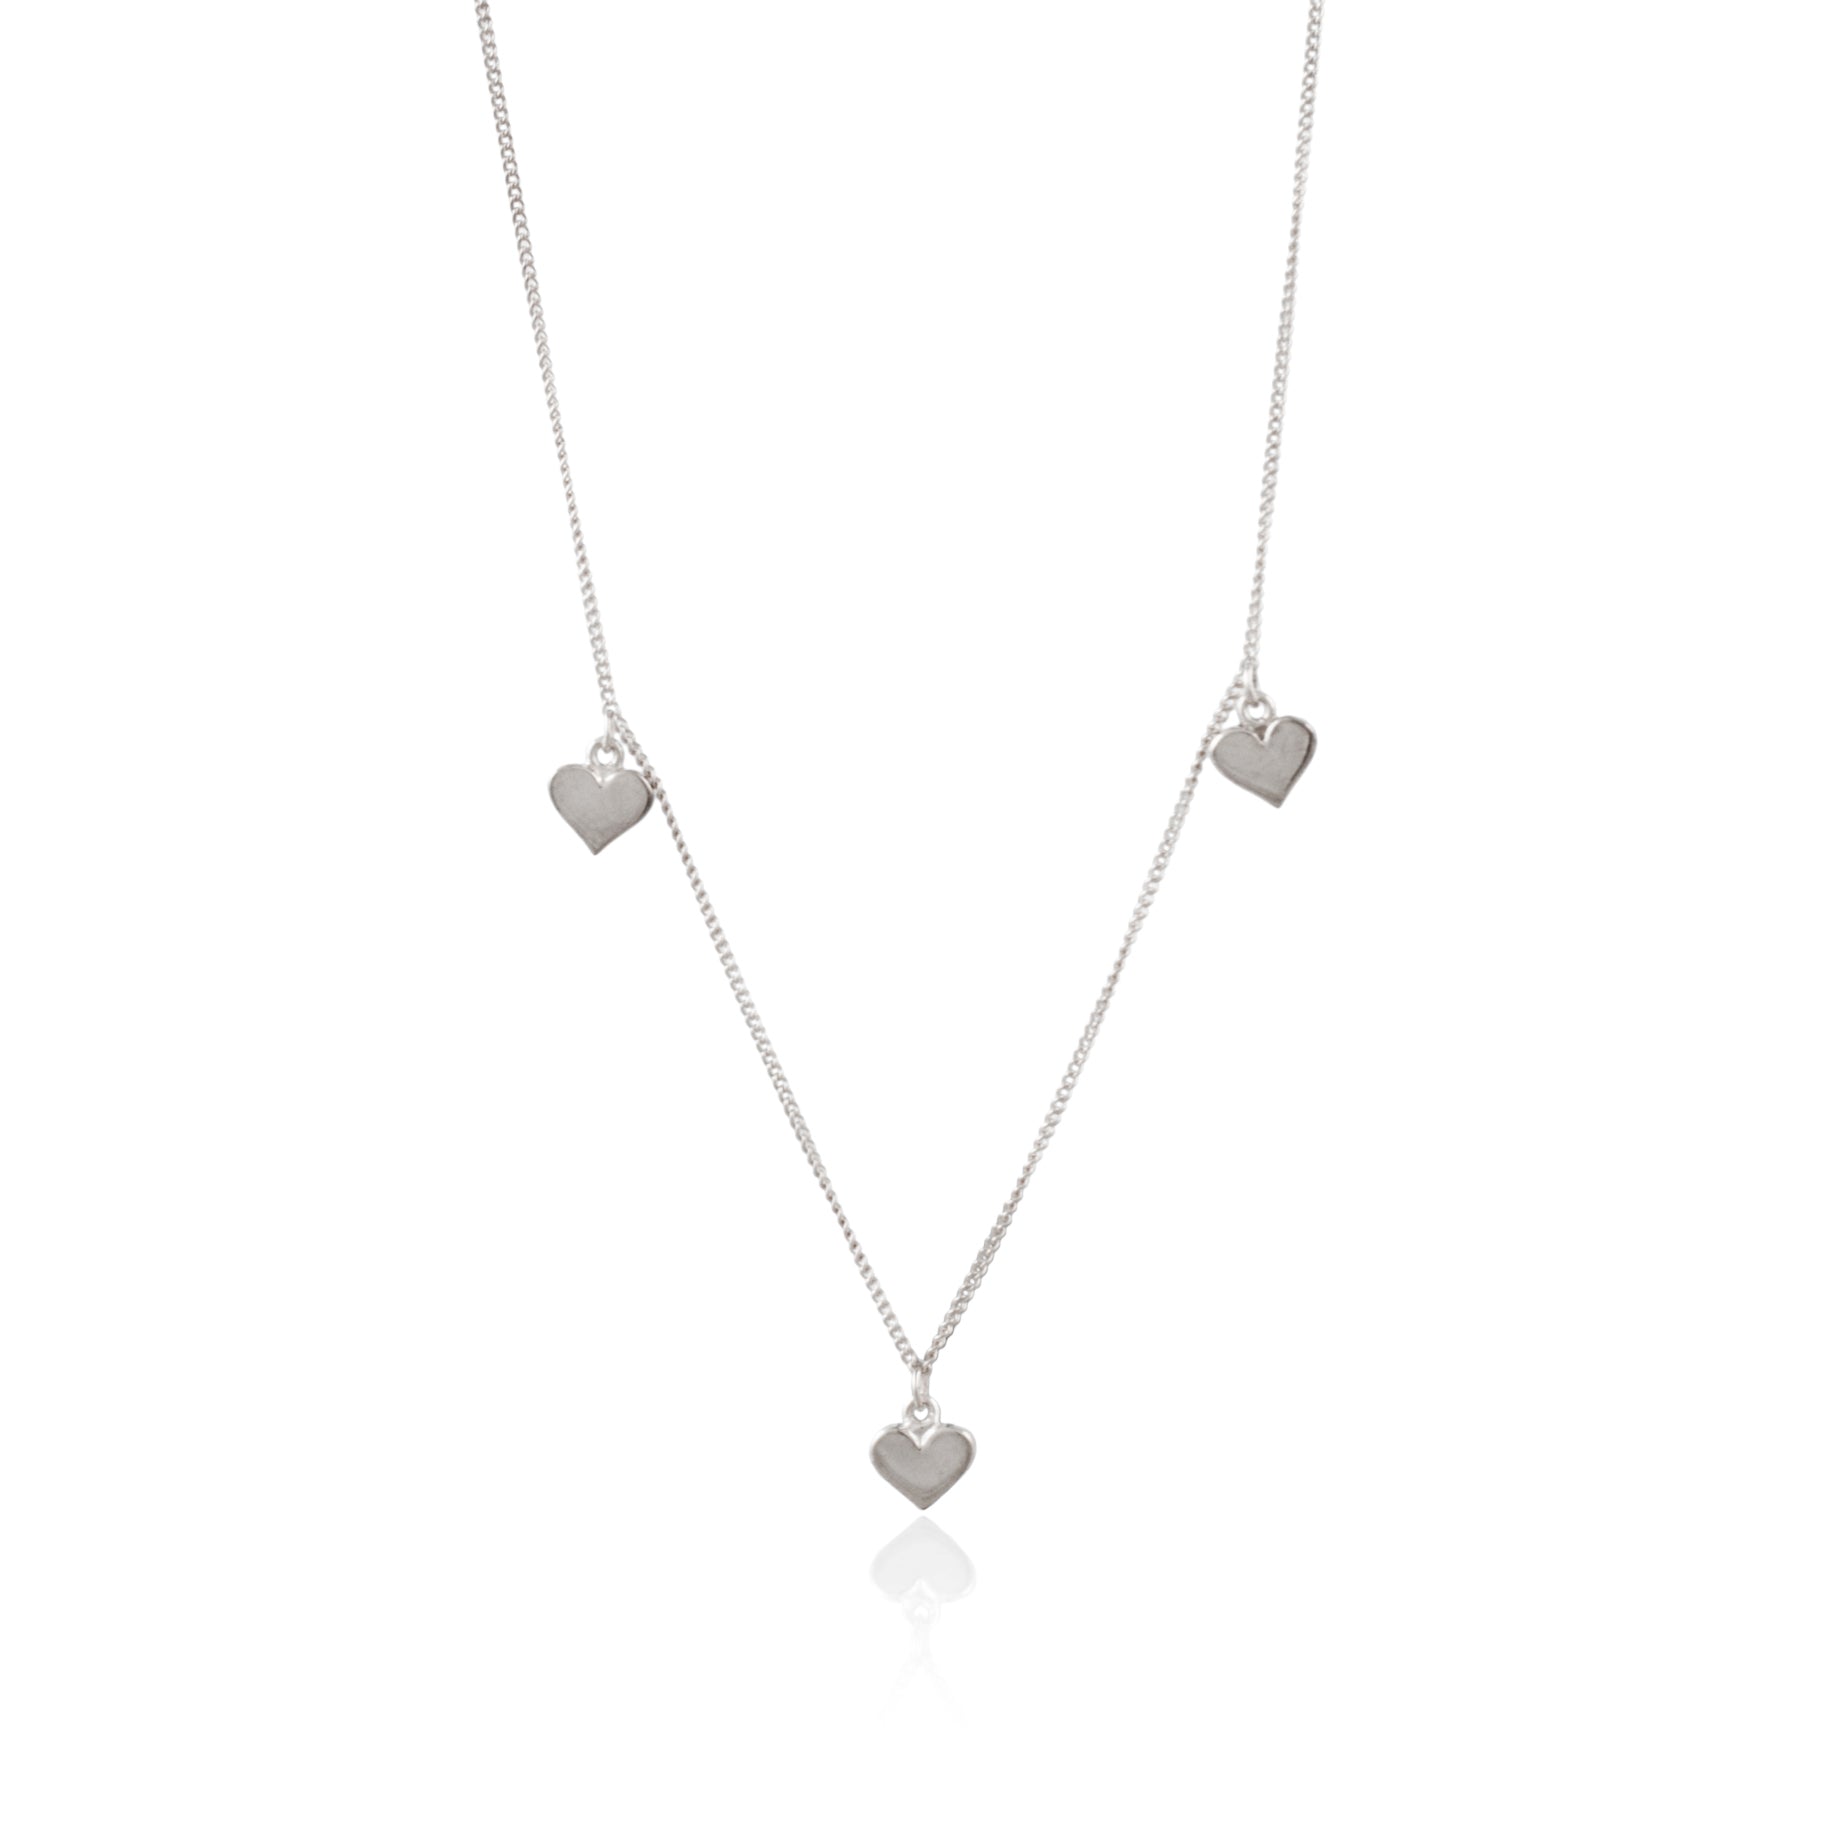 Trio of Hearts Necklace Heart of Gold in Solid Silver